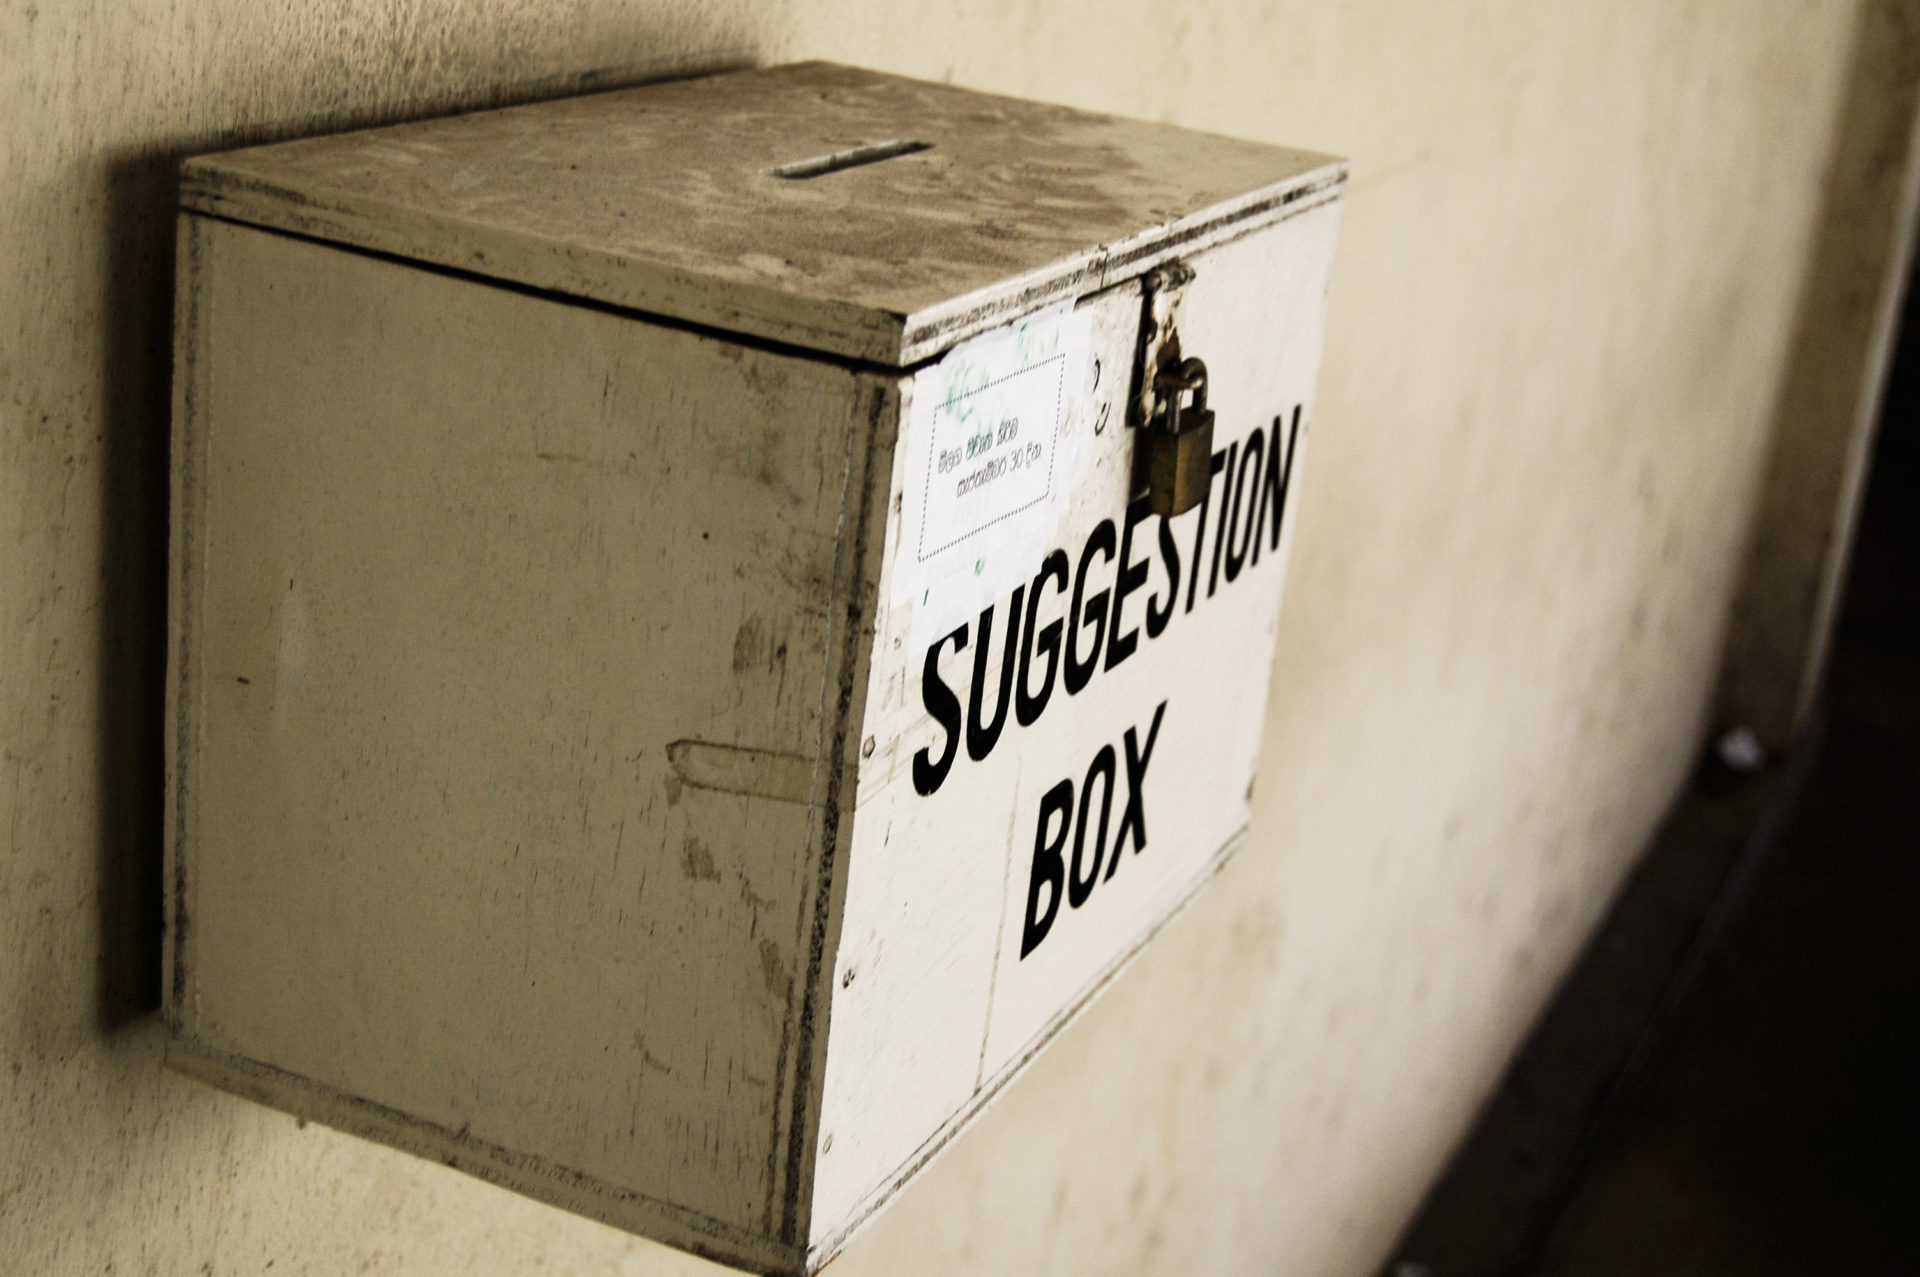 Old box for submitting complaints nailed to a wall.